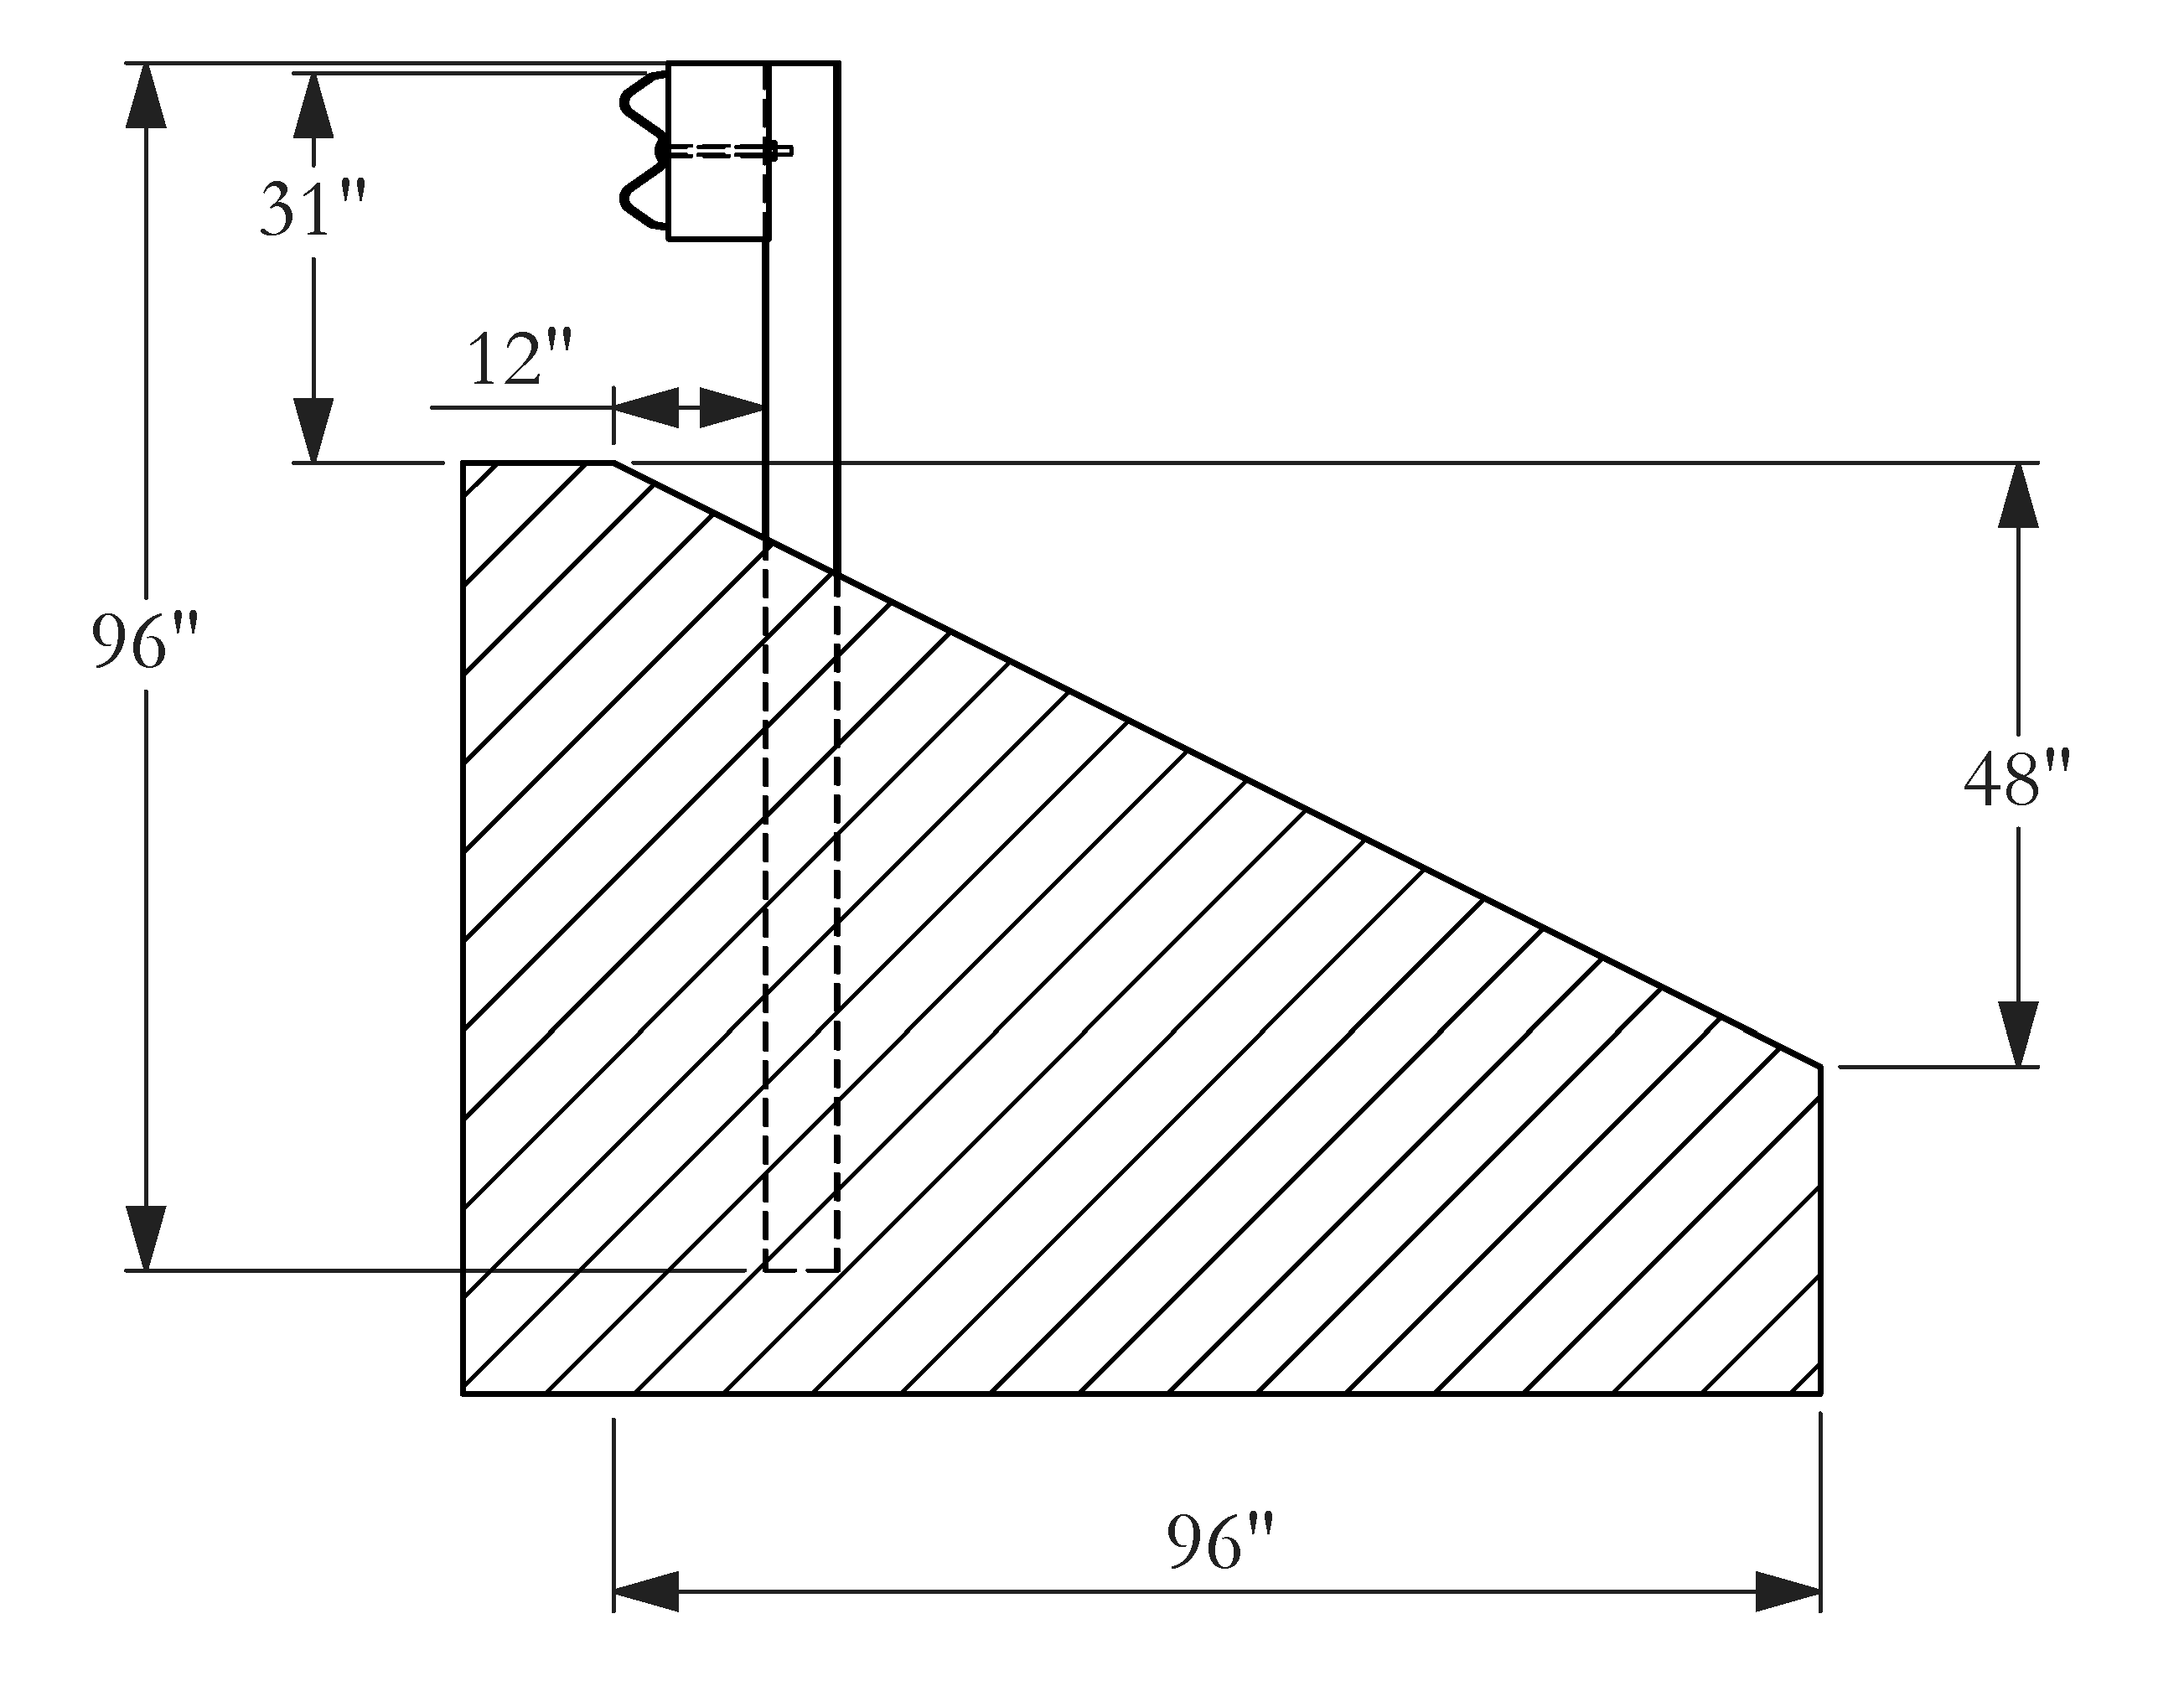 Figure 2. Cross Section of the Guardrail on Slope System Tested by TTI.